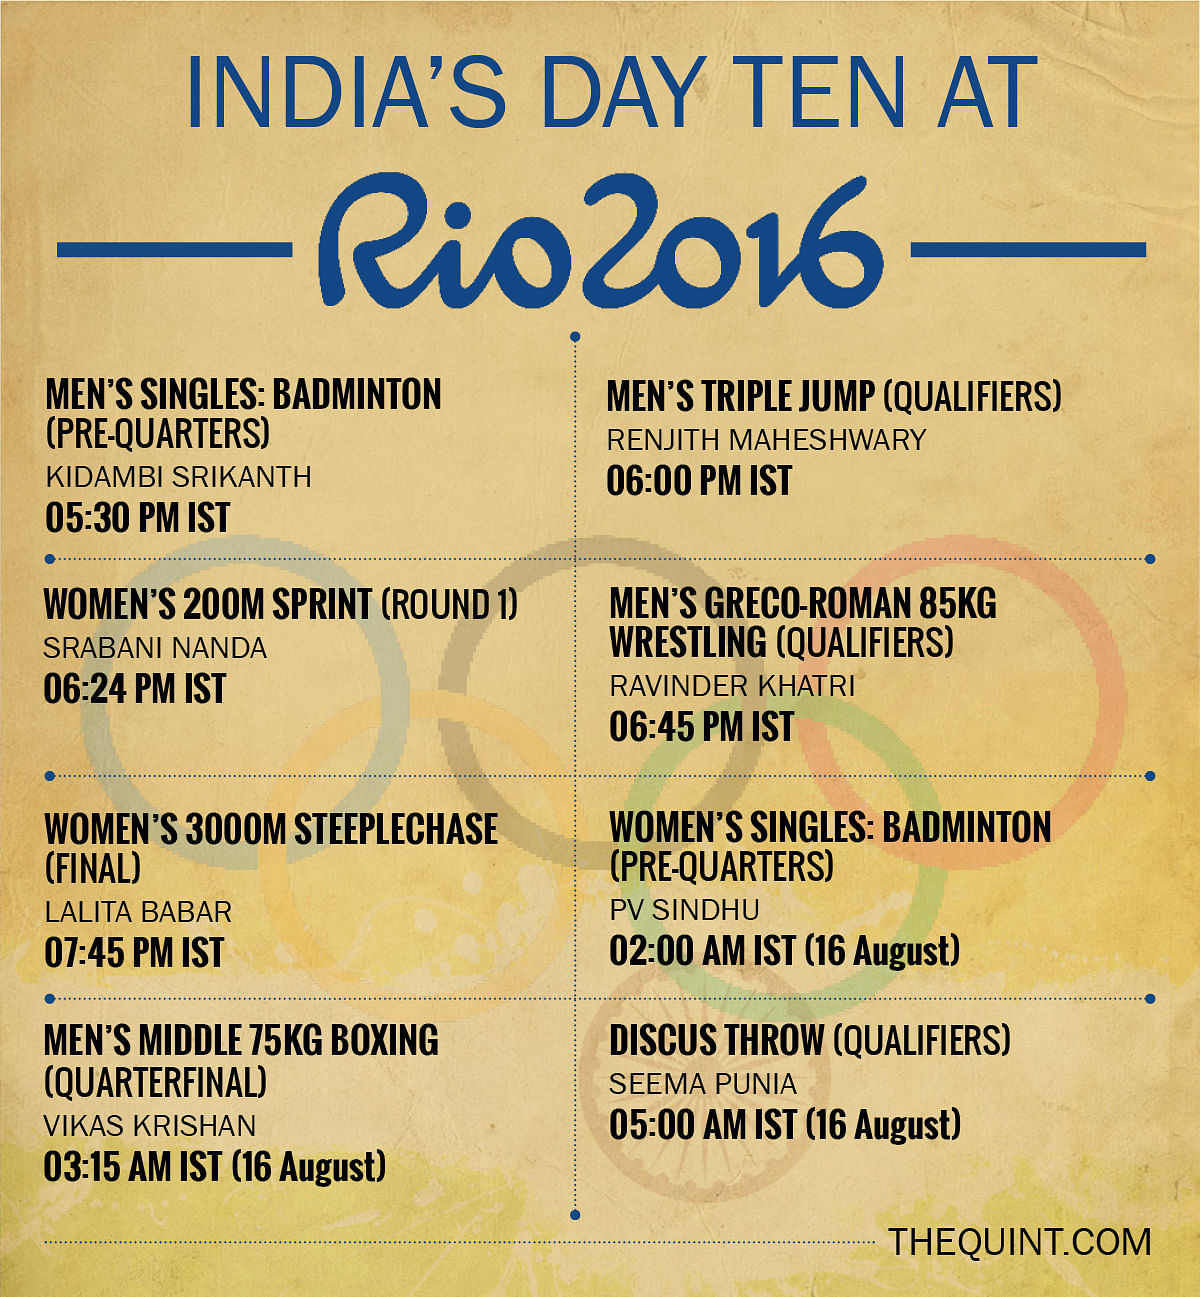 Take a look at India’s schedule for the tenth day of the Rio Olympics.